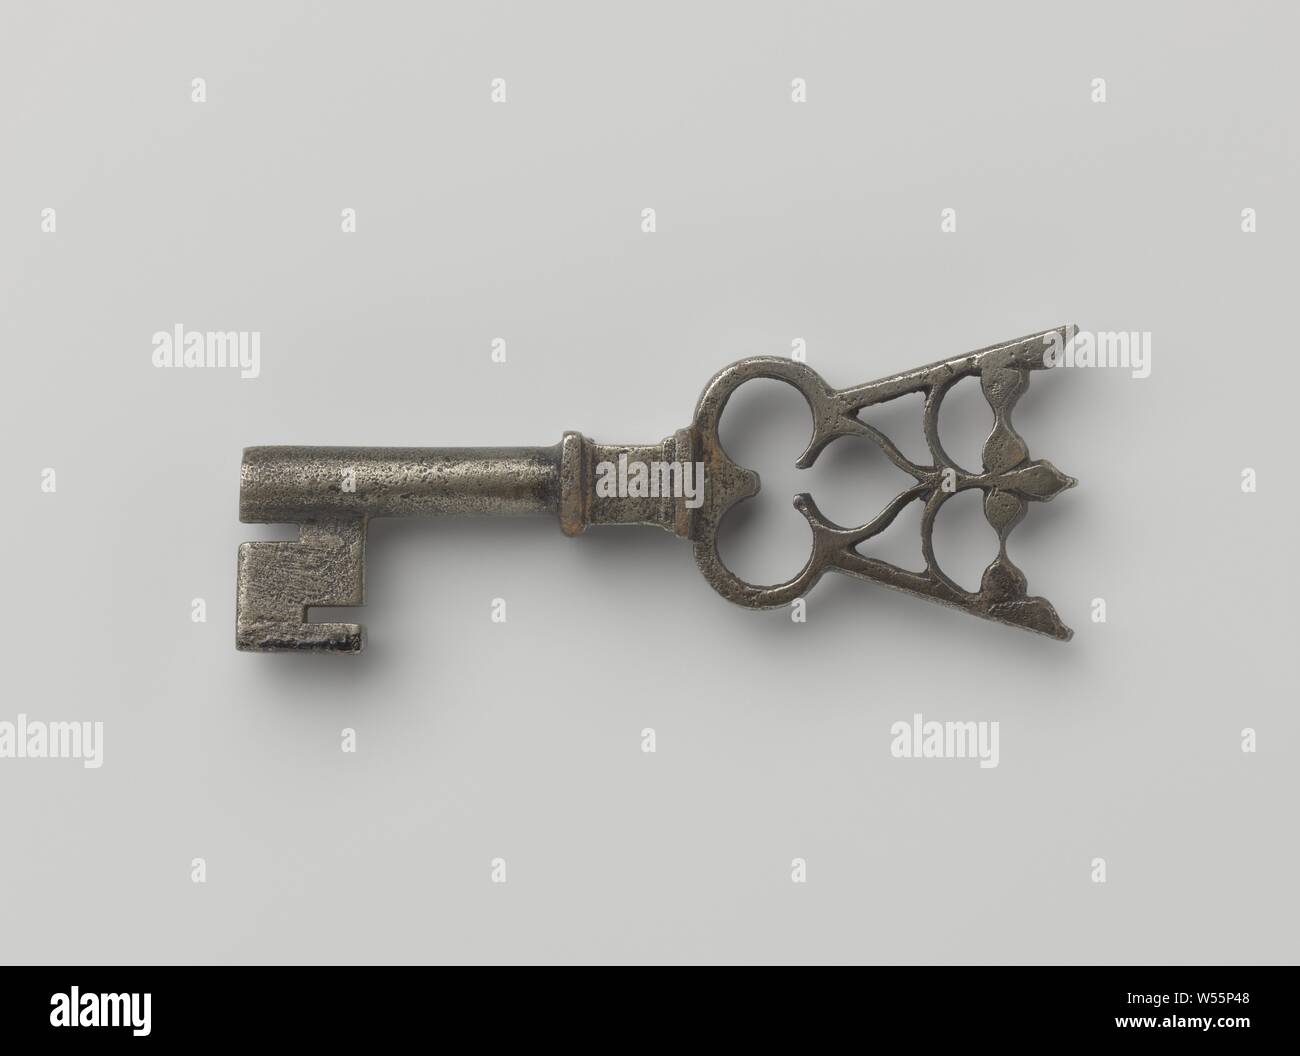 Pipe wrench whose handle is clover-leaf shaped and ends in a floral crown. Under the handle is a profiled four-sided capital., France, c. 1400 - c. 1500, iron (metal), l 8.5 cm × w 3.2 cm Stock Photo